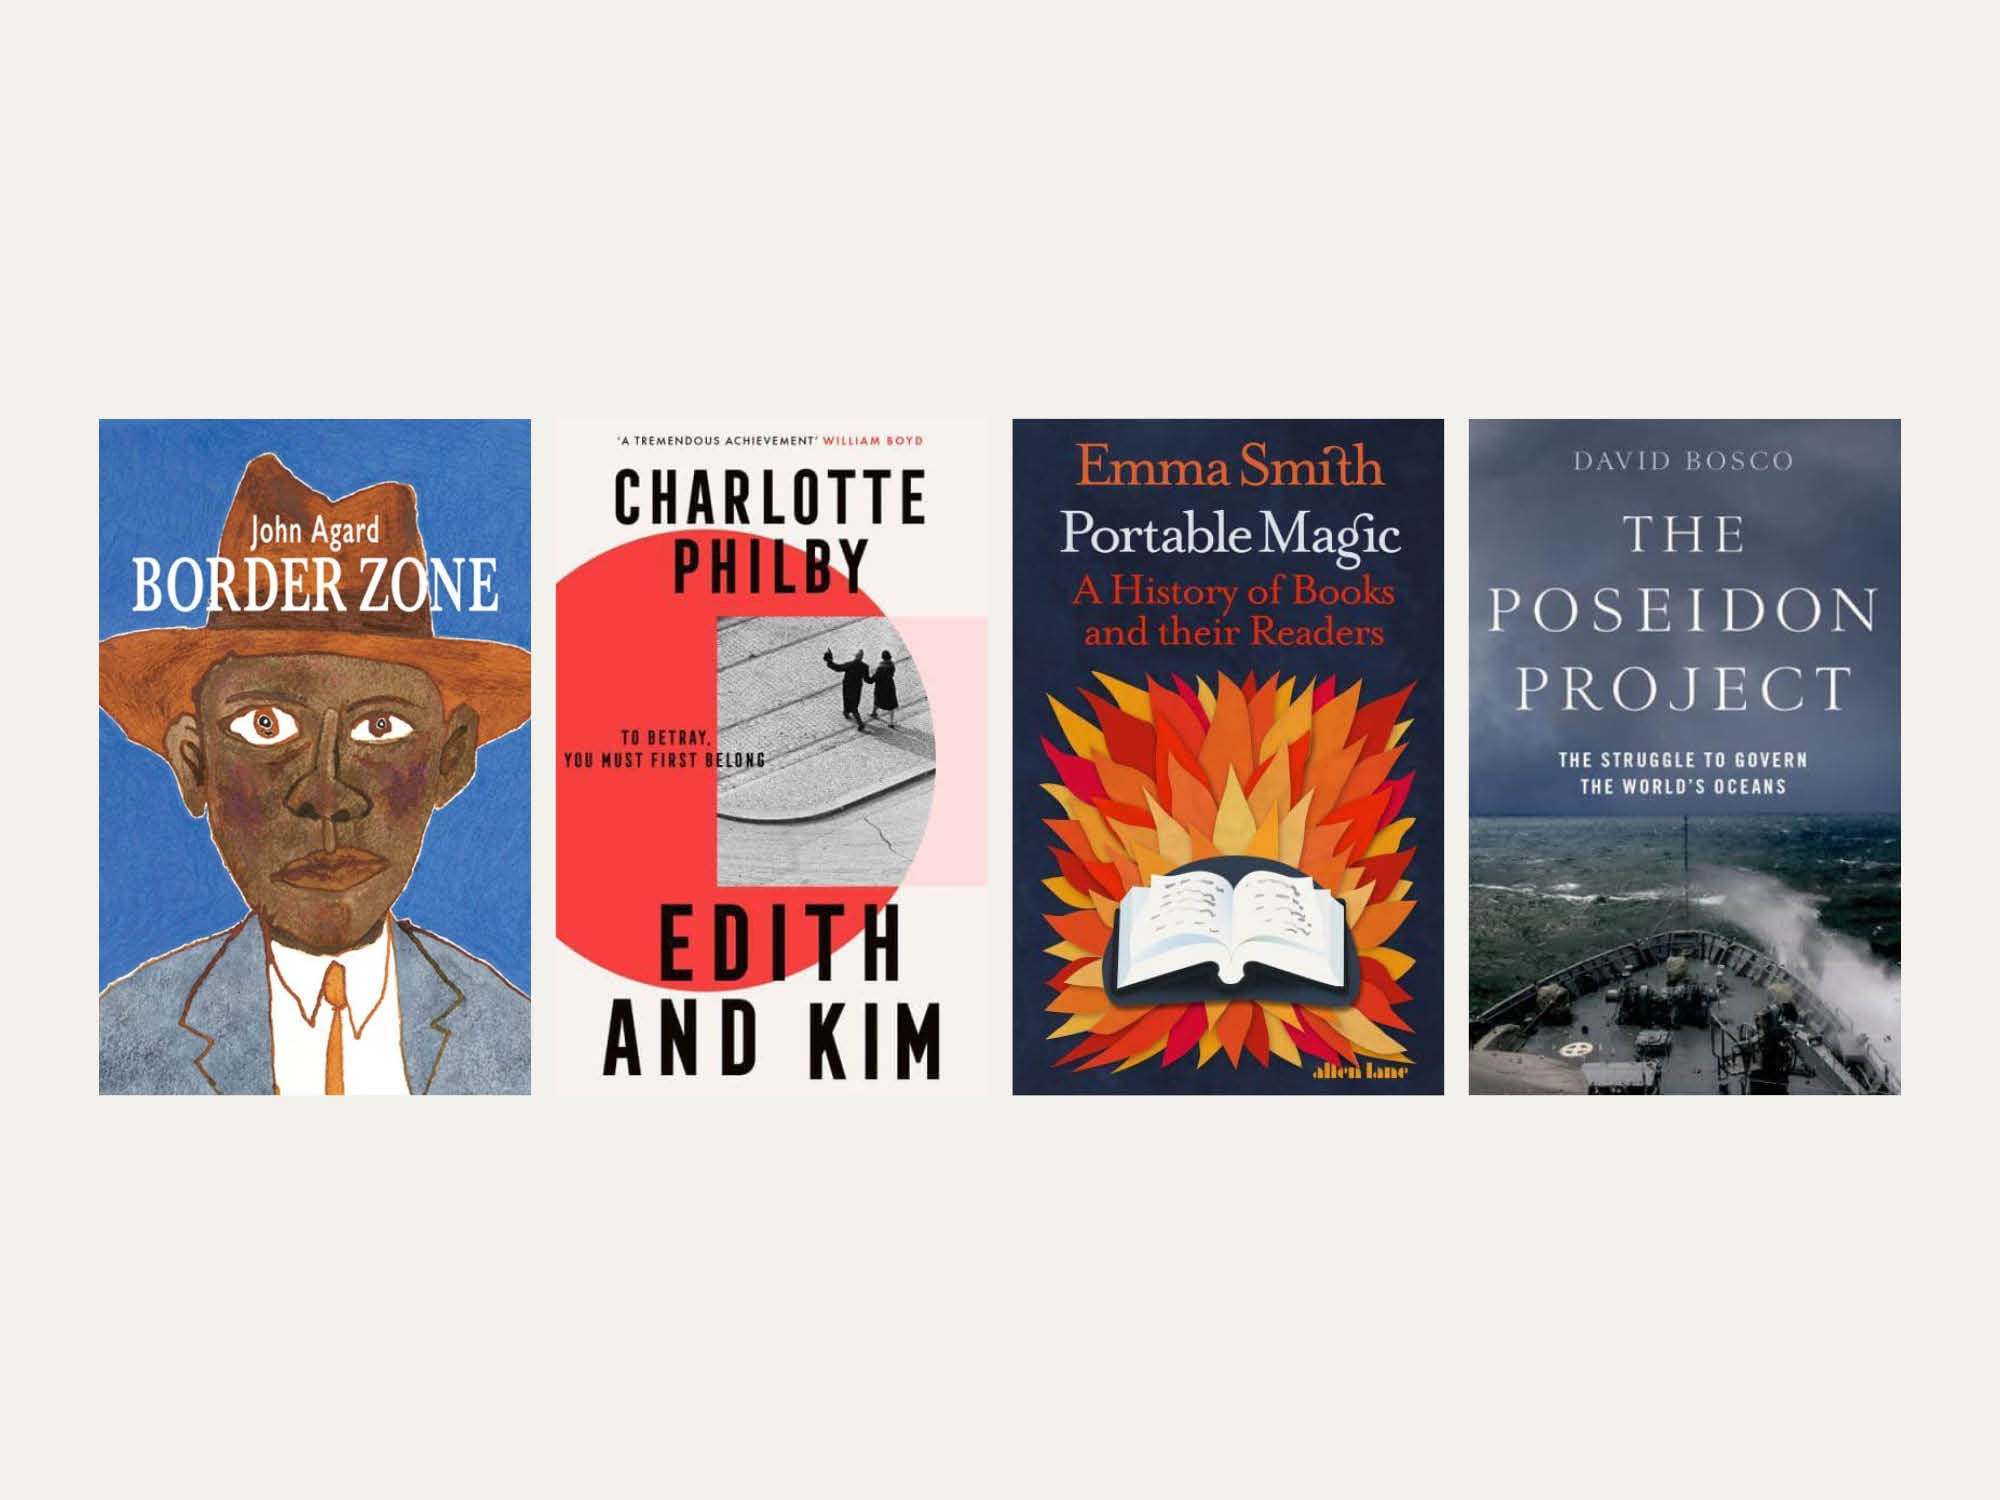 Reviewed in short: New books from David Bosco, Emma Smith, Charlotte Philby and John Agard